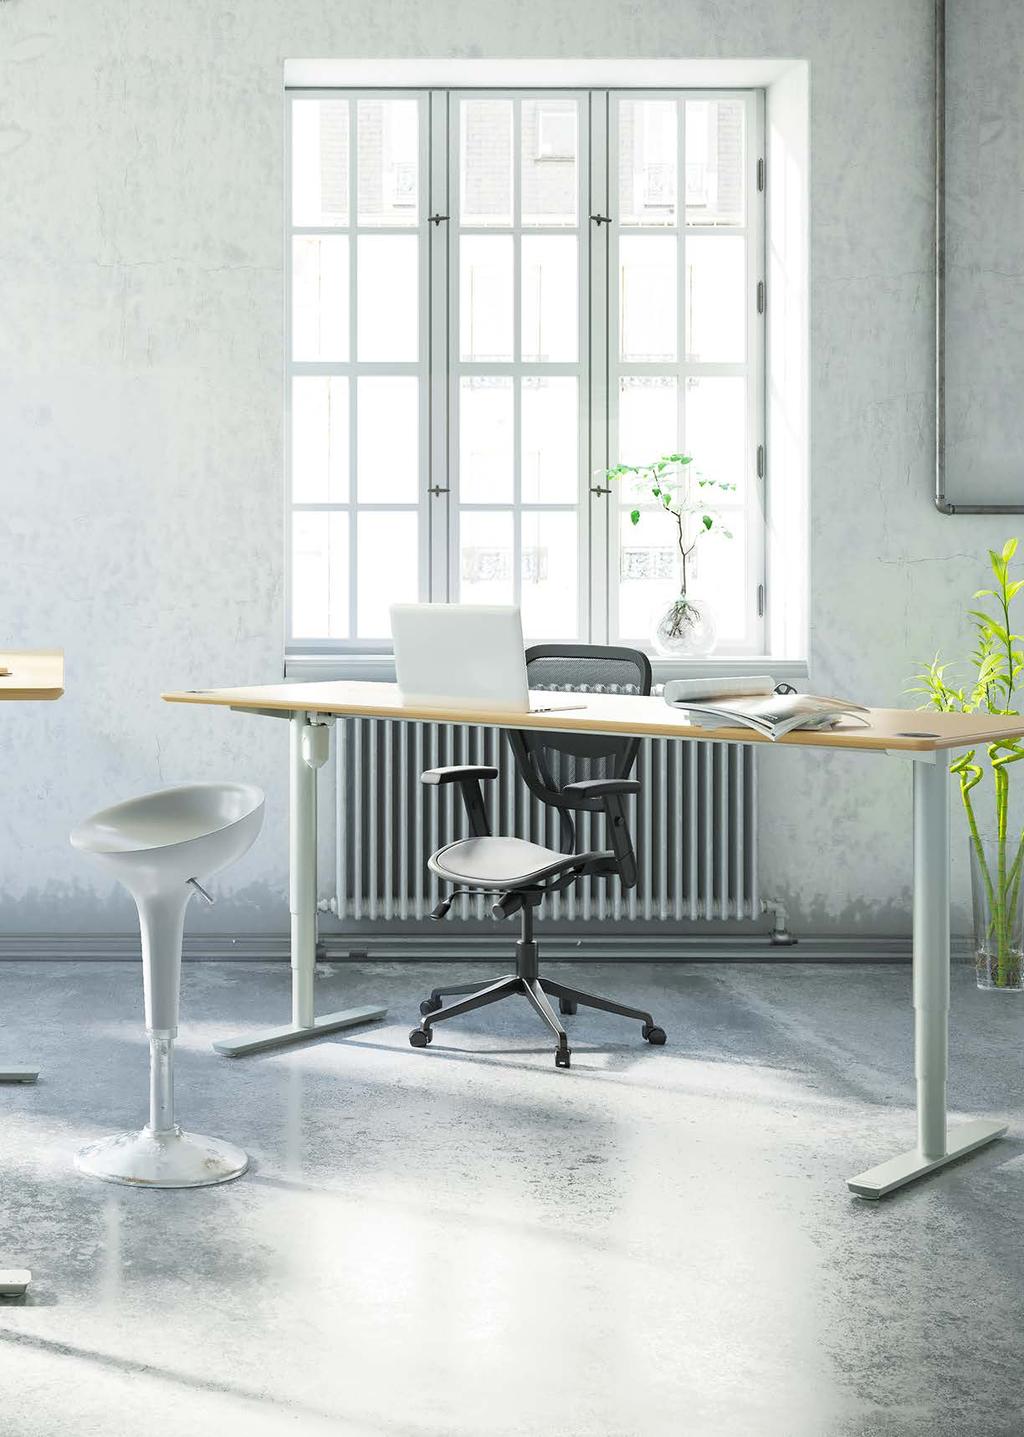 501-49 501-49 A minimalistic and elegant look An elegant desk with 2 columns designed in a minimalistic look, which will complement any office environment.